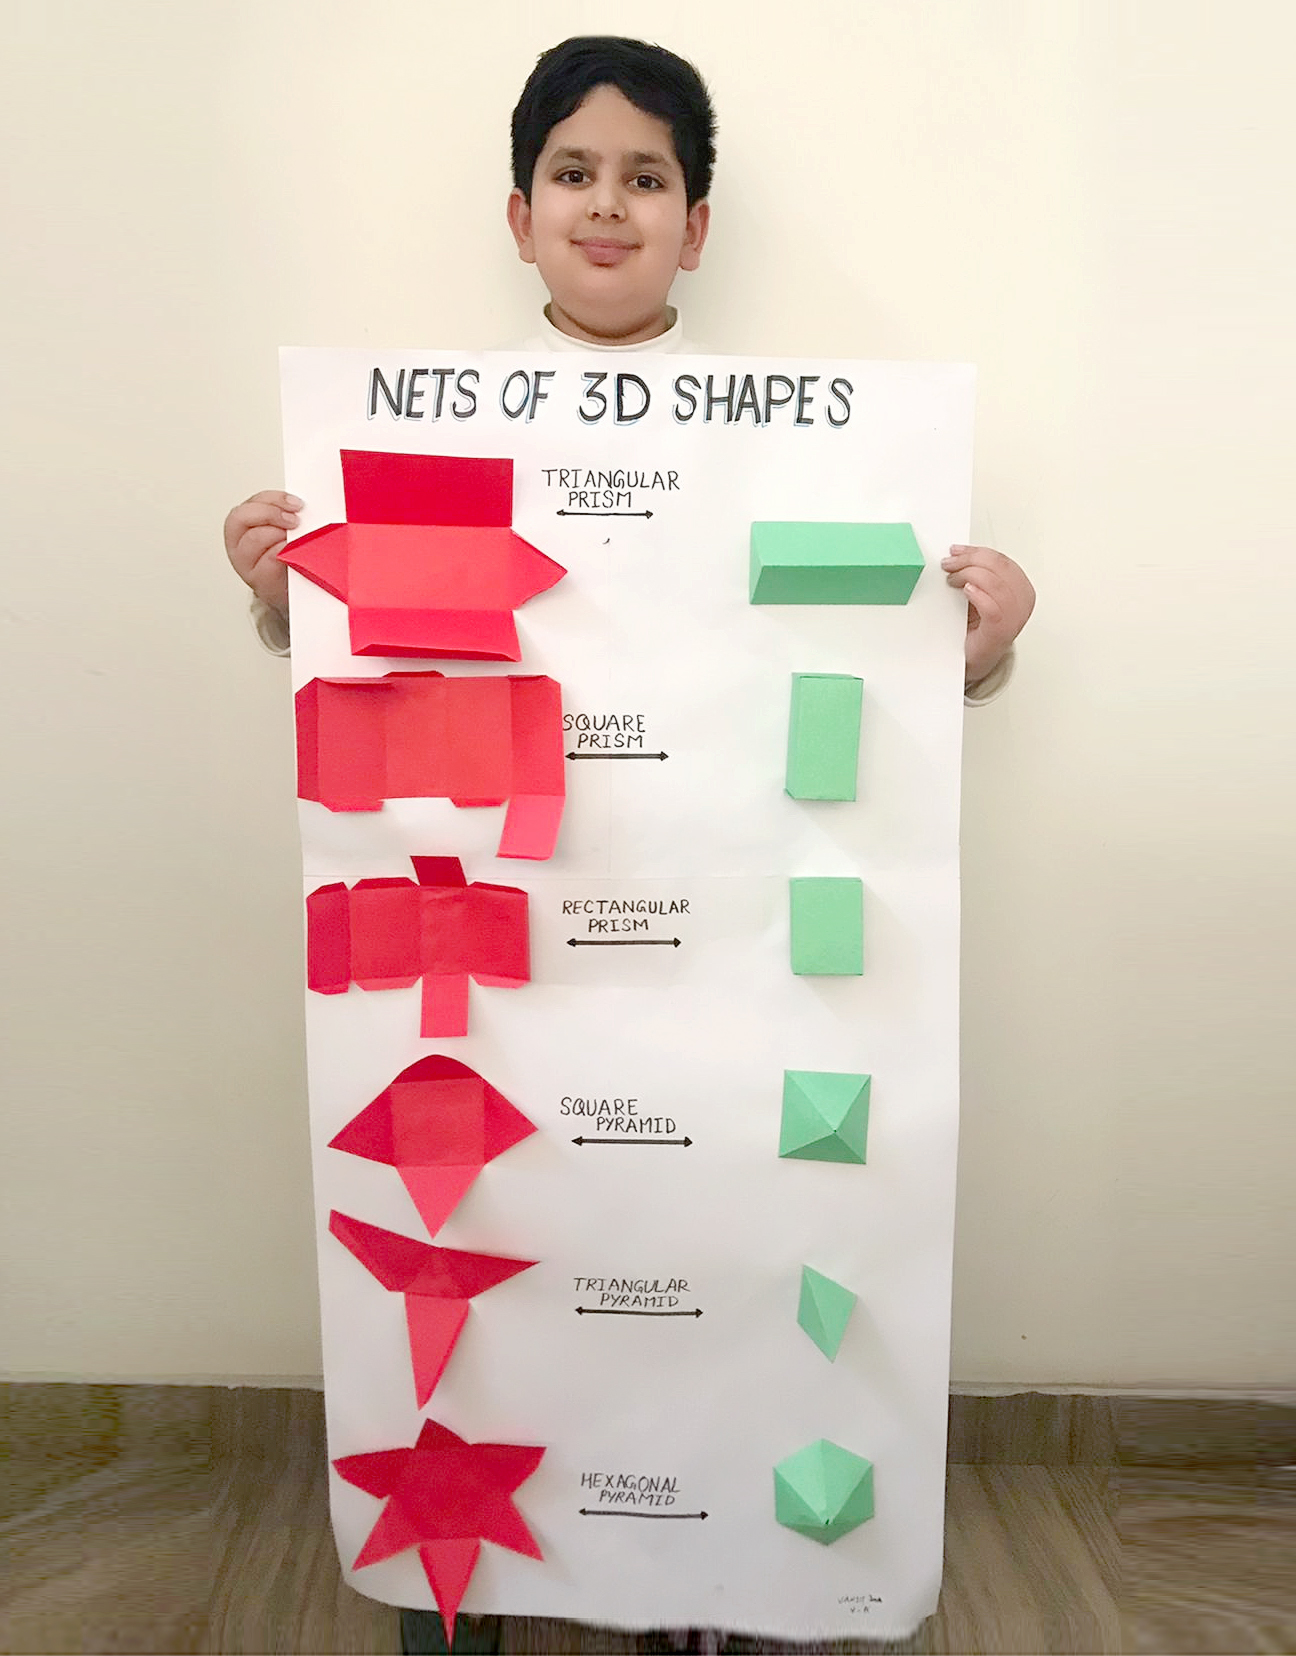 Presidium Dwarka-6, STUDENTS LEARN ABOUT THE 3D SHAPES WITH A FUN ACTIVITY